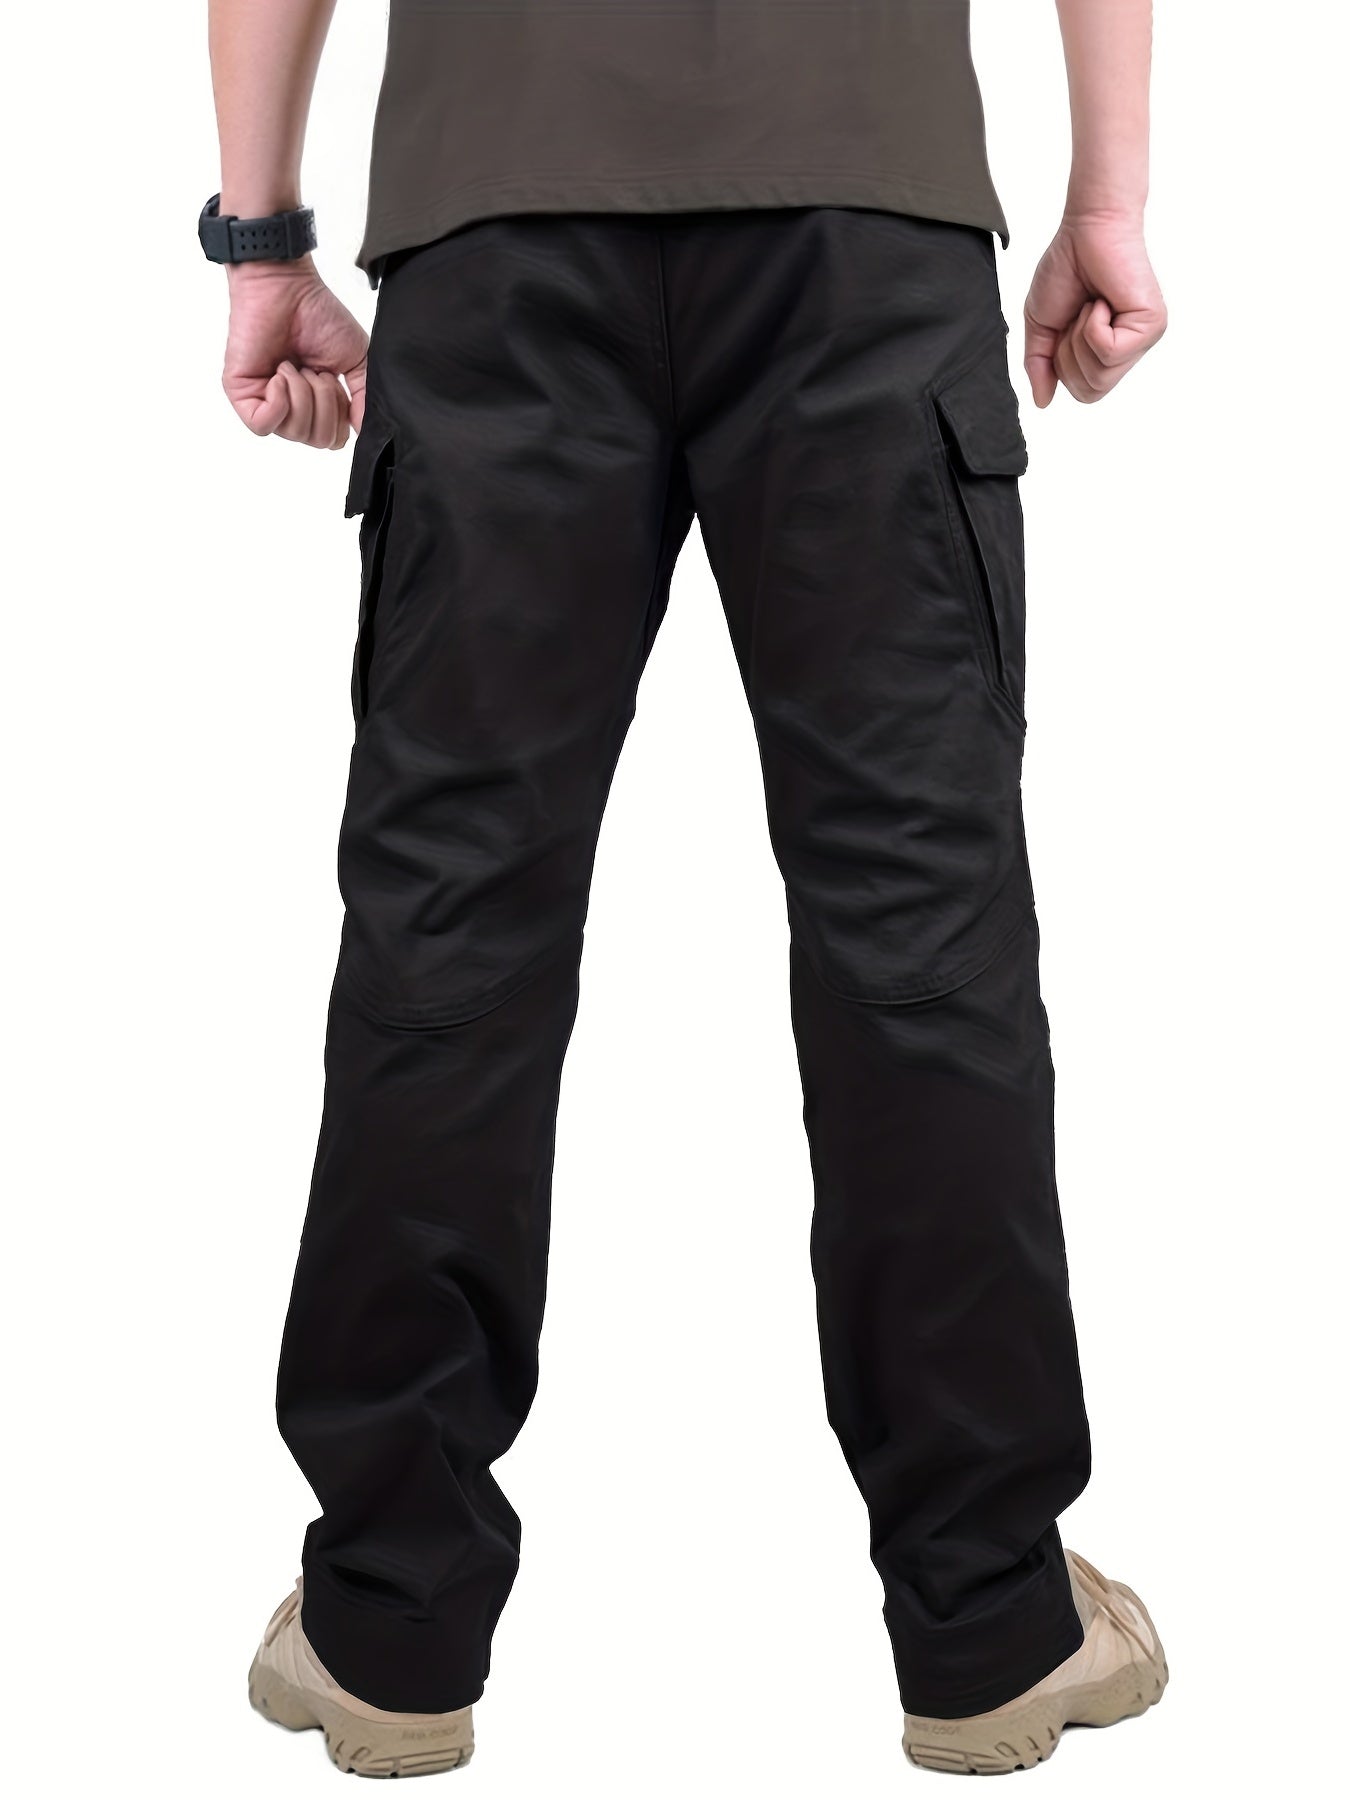 High Quality Men's Waterproof Tactical Pants Army Users Outside Sports Hiking Pants